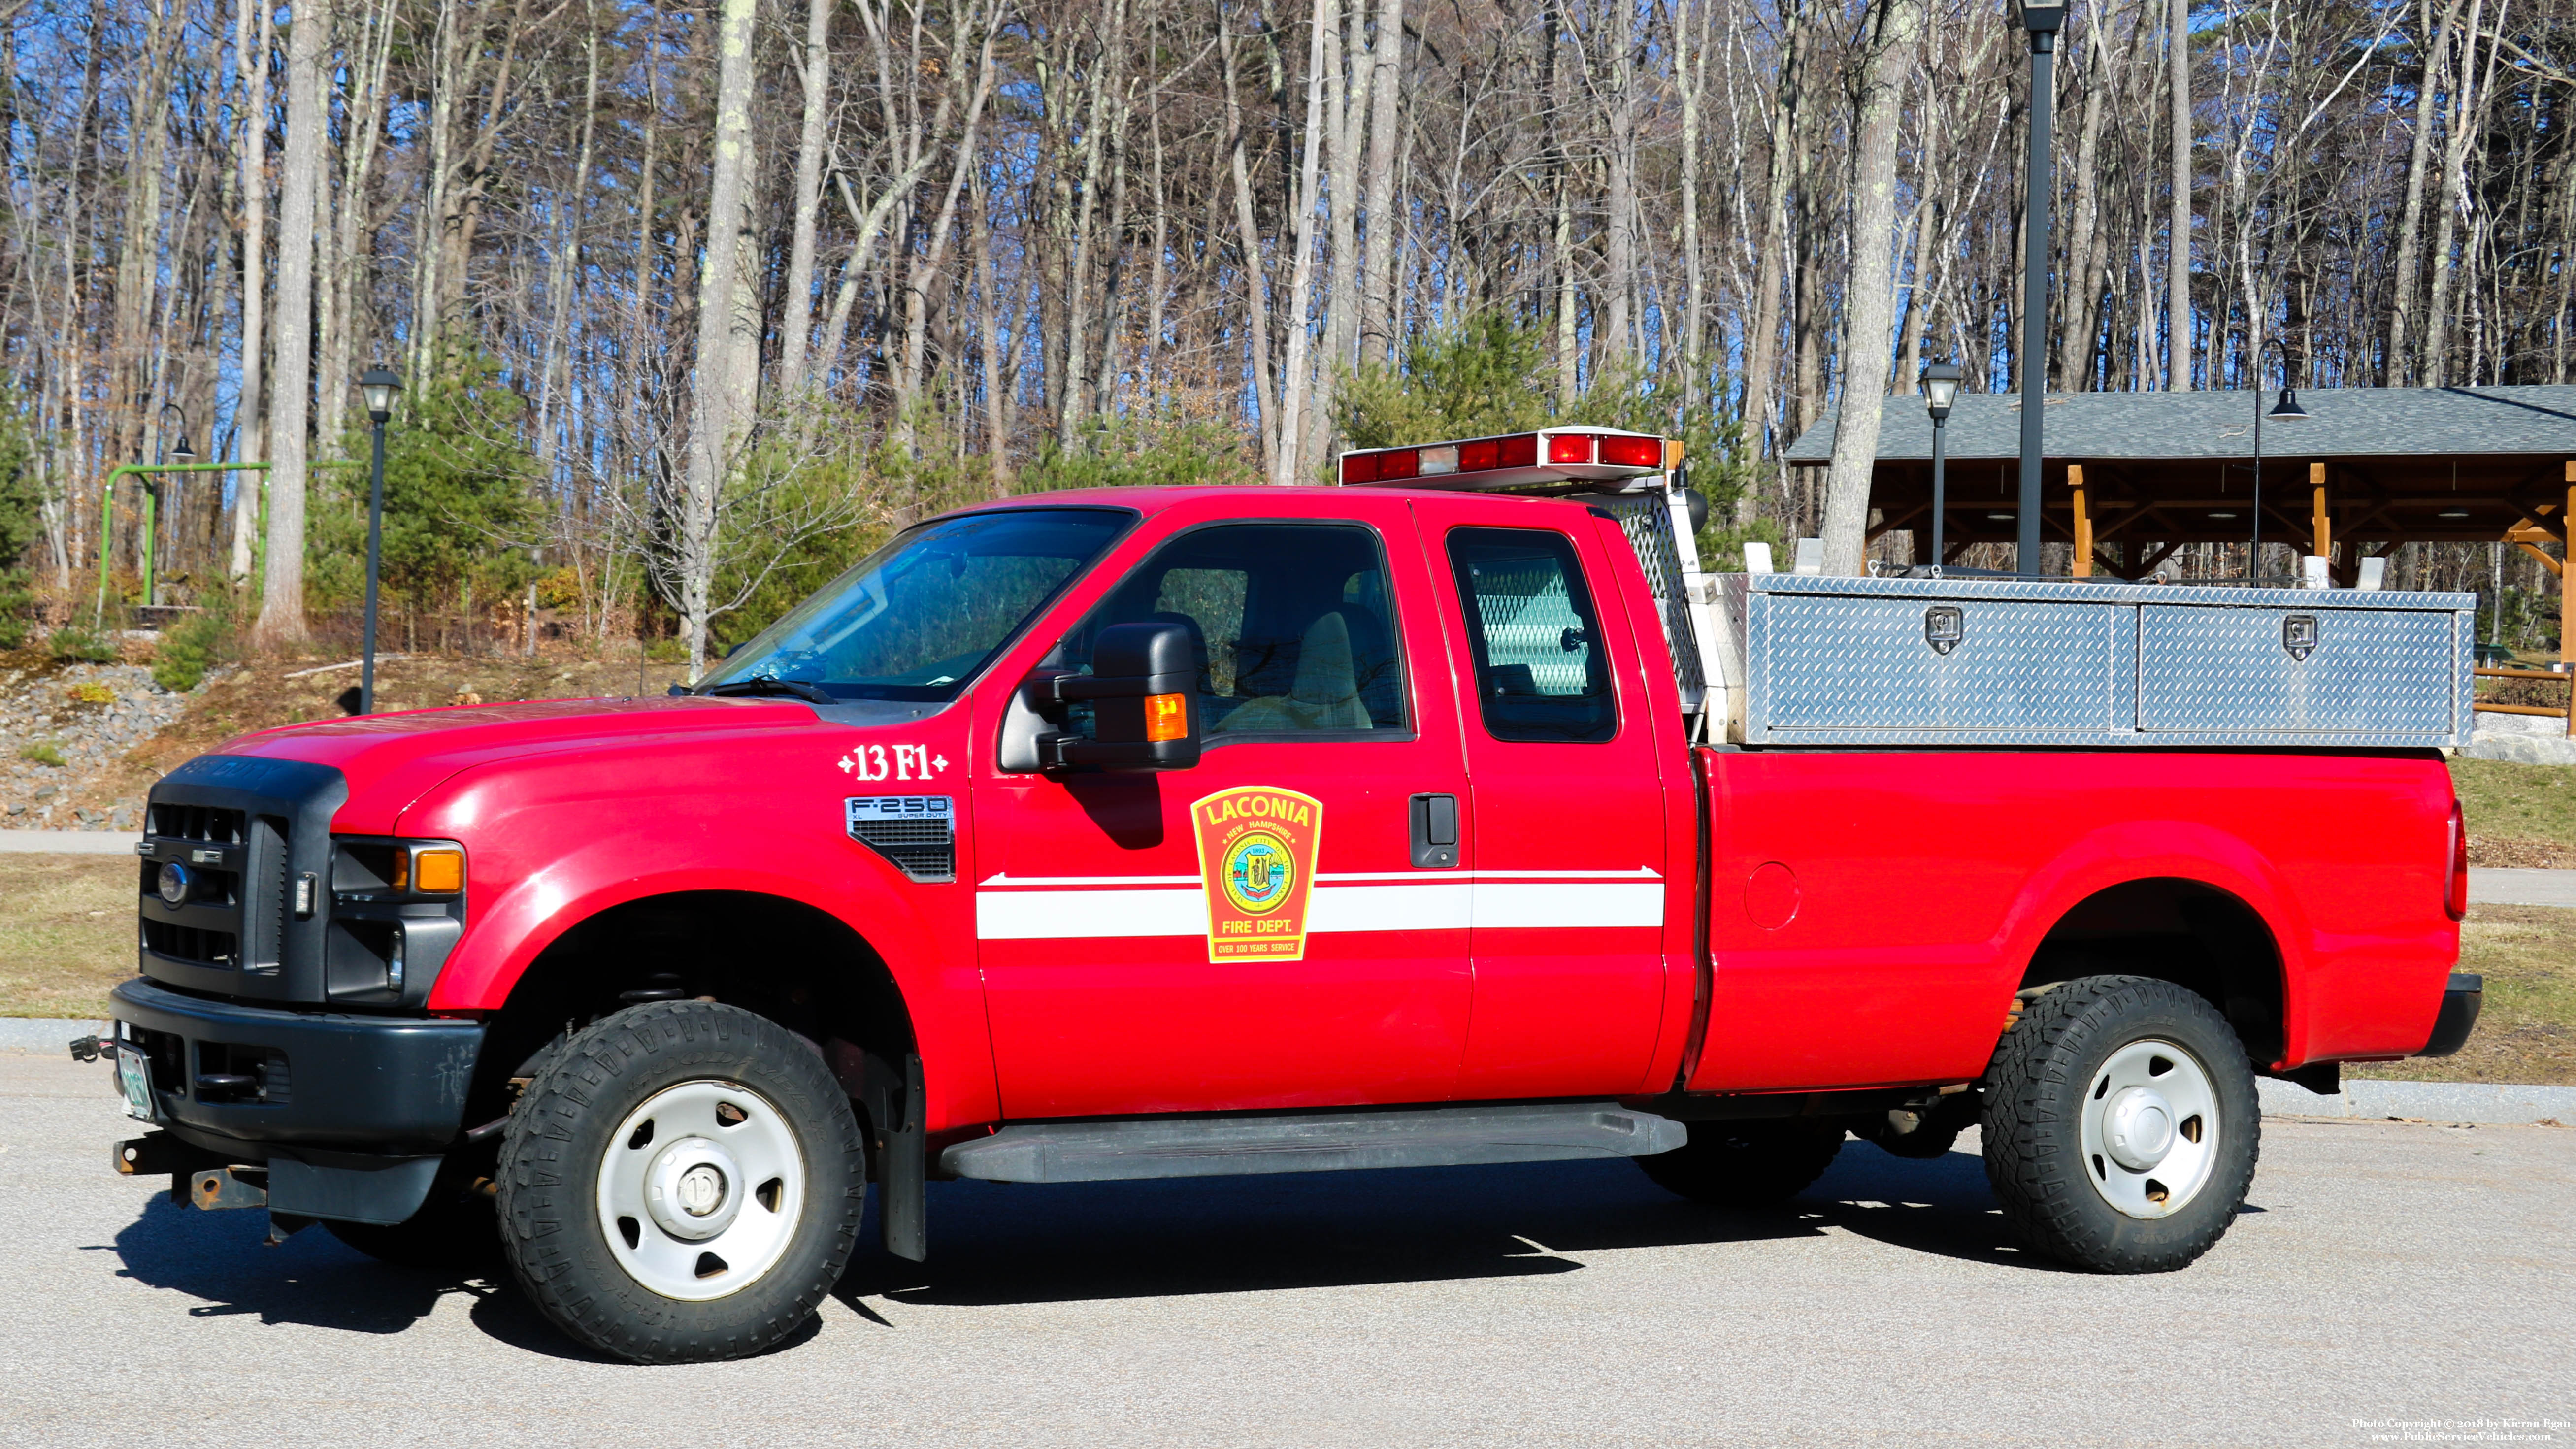 A photo  of Laconia Fire
            13 Forestry 1, a 2008 Ford F-250 Super Cab             taken by Kieran Egan